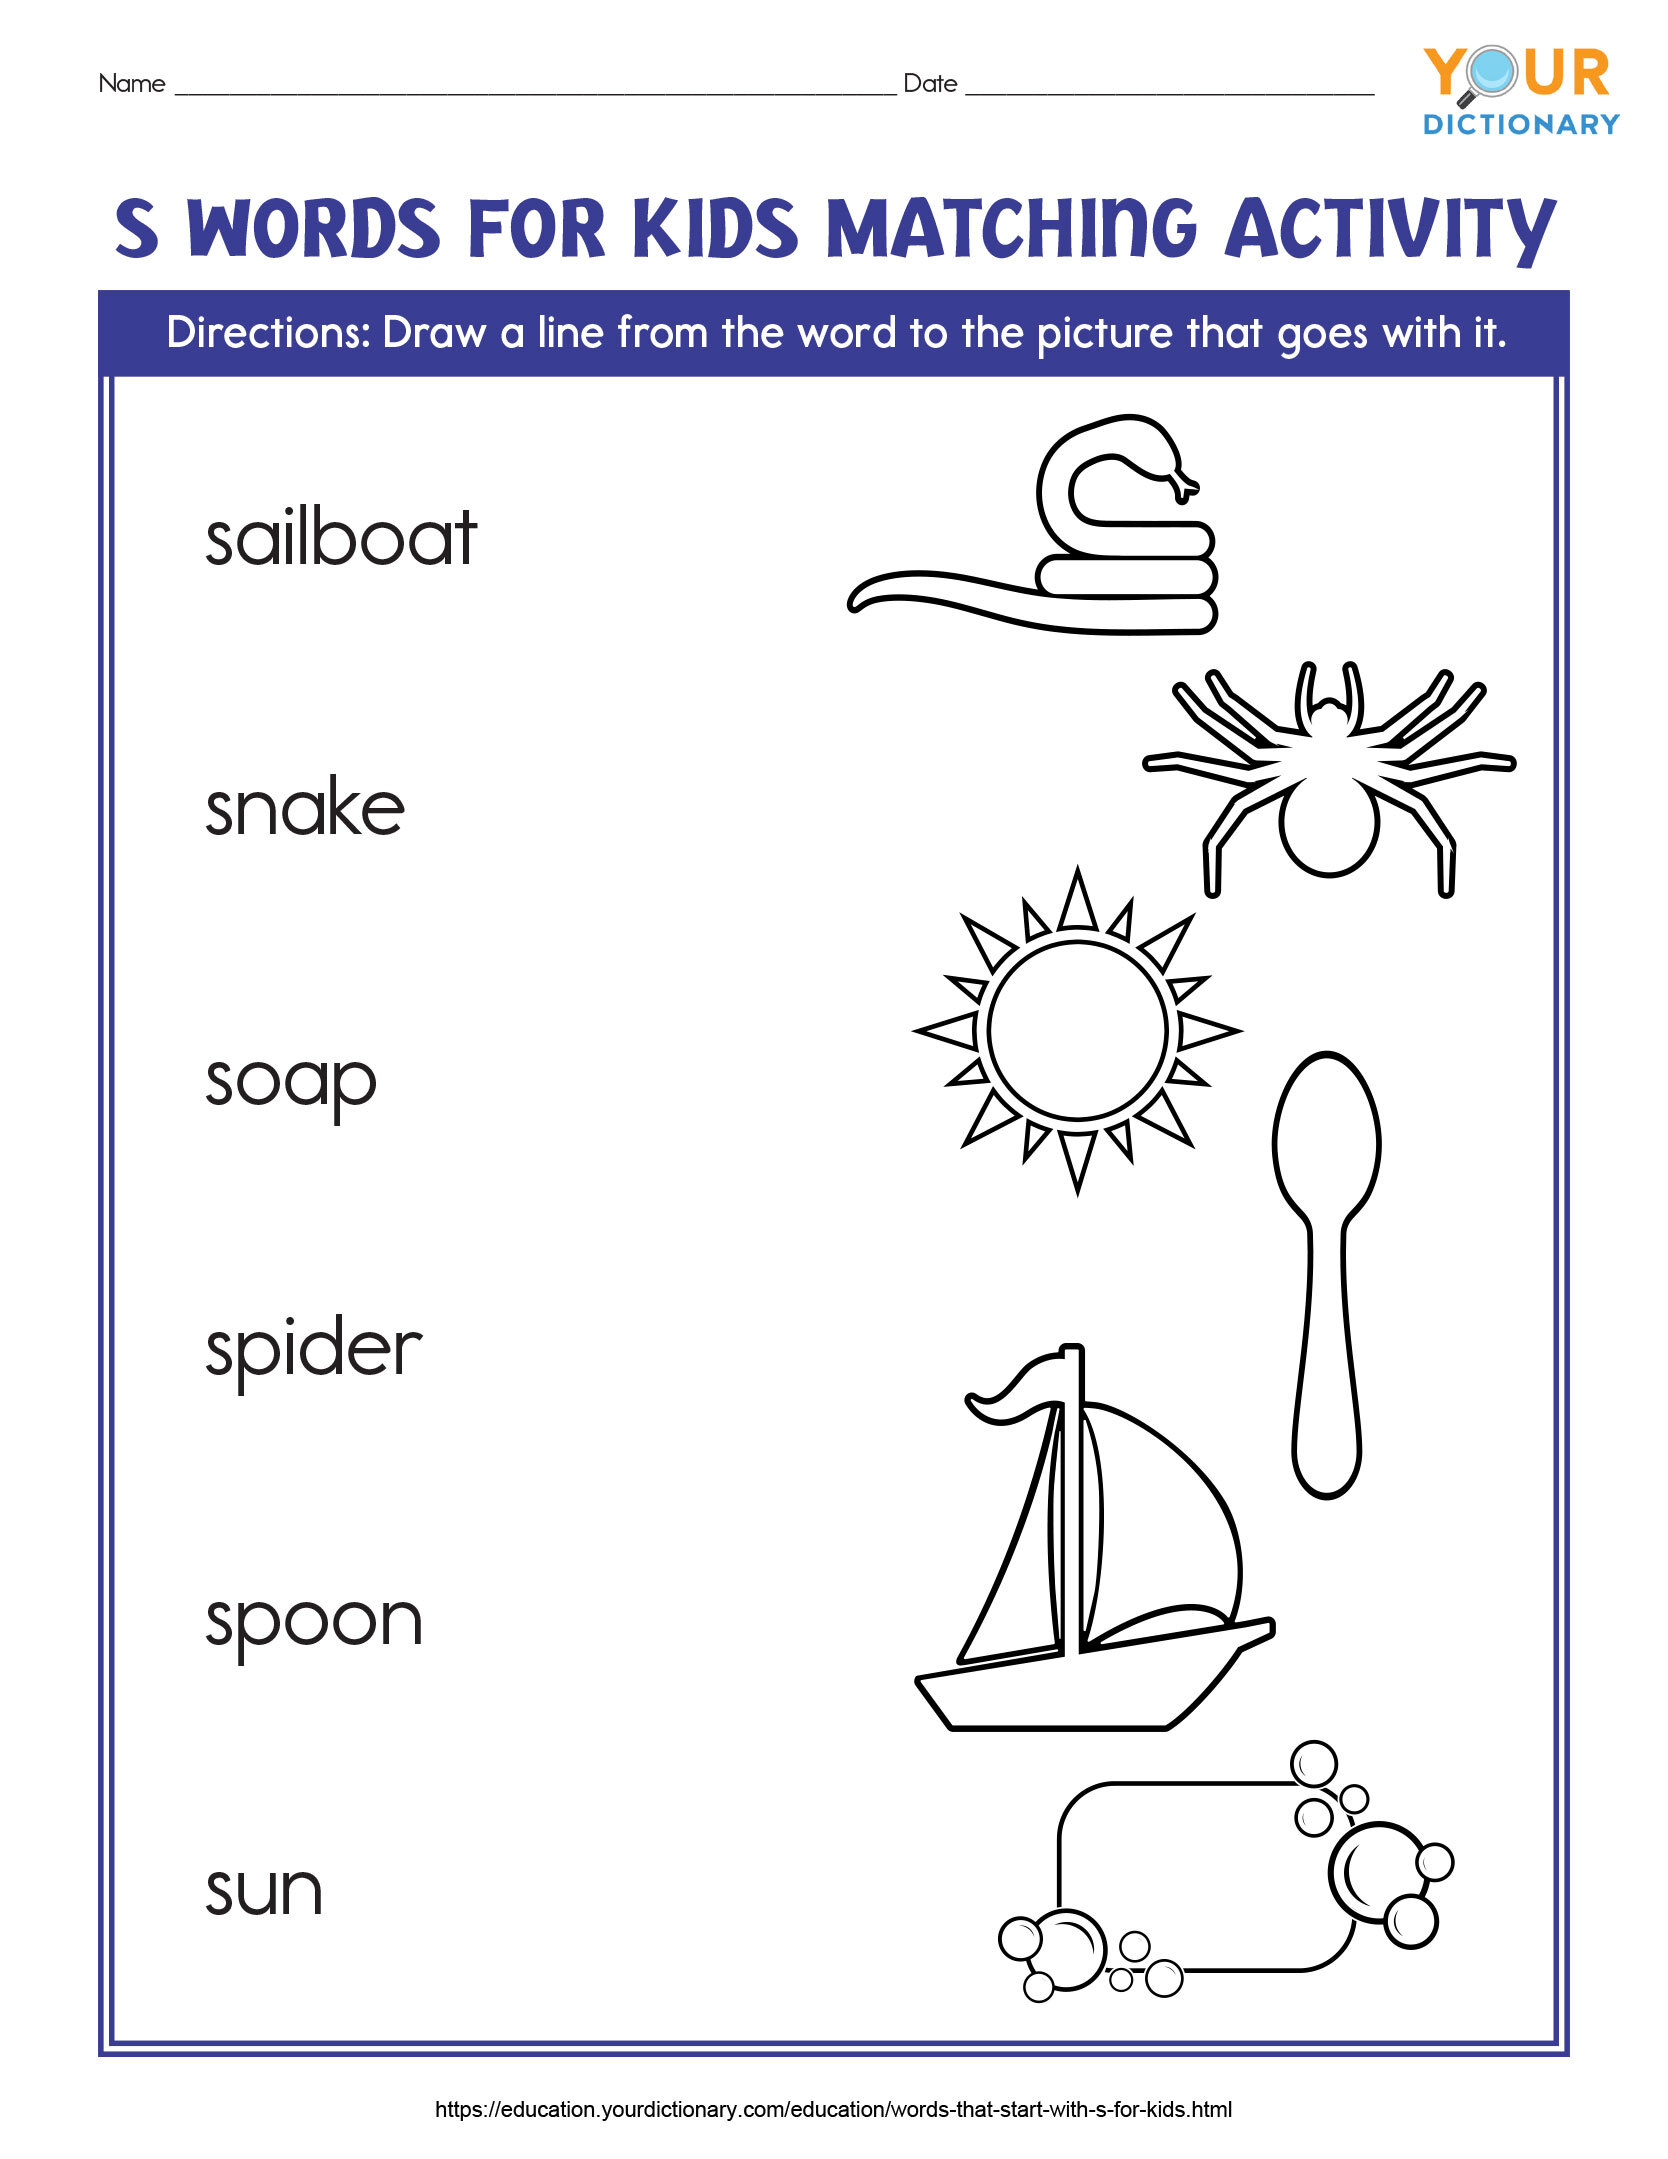 s words for kids matching activity